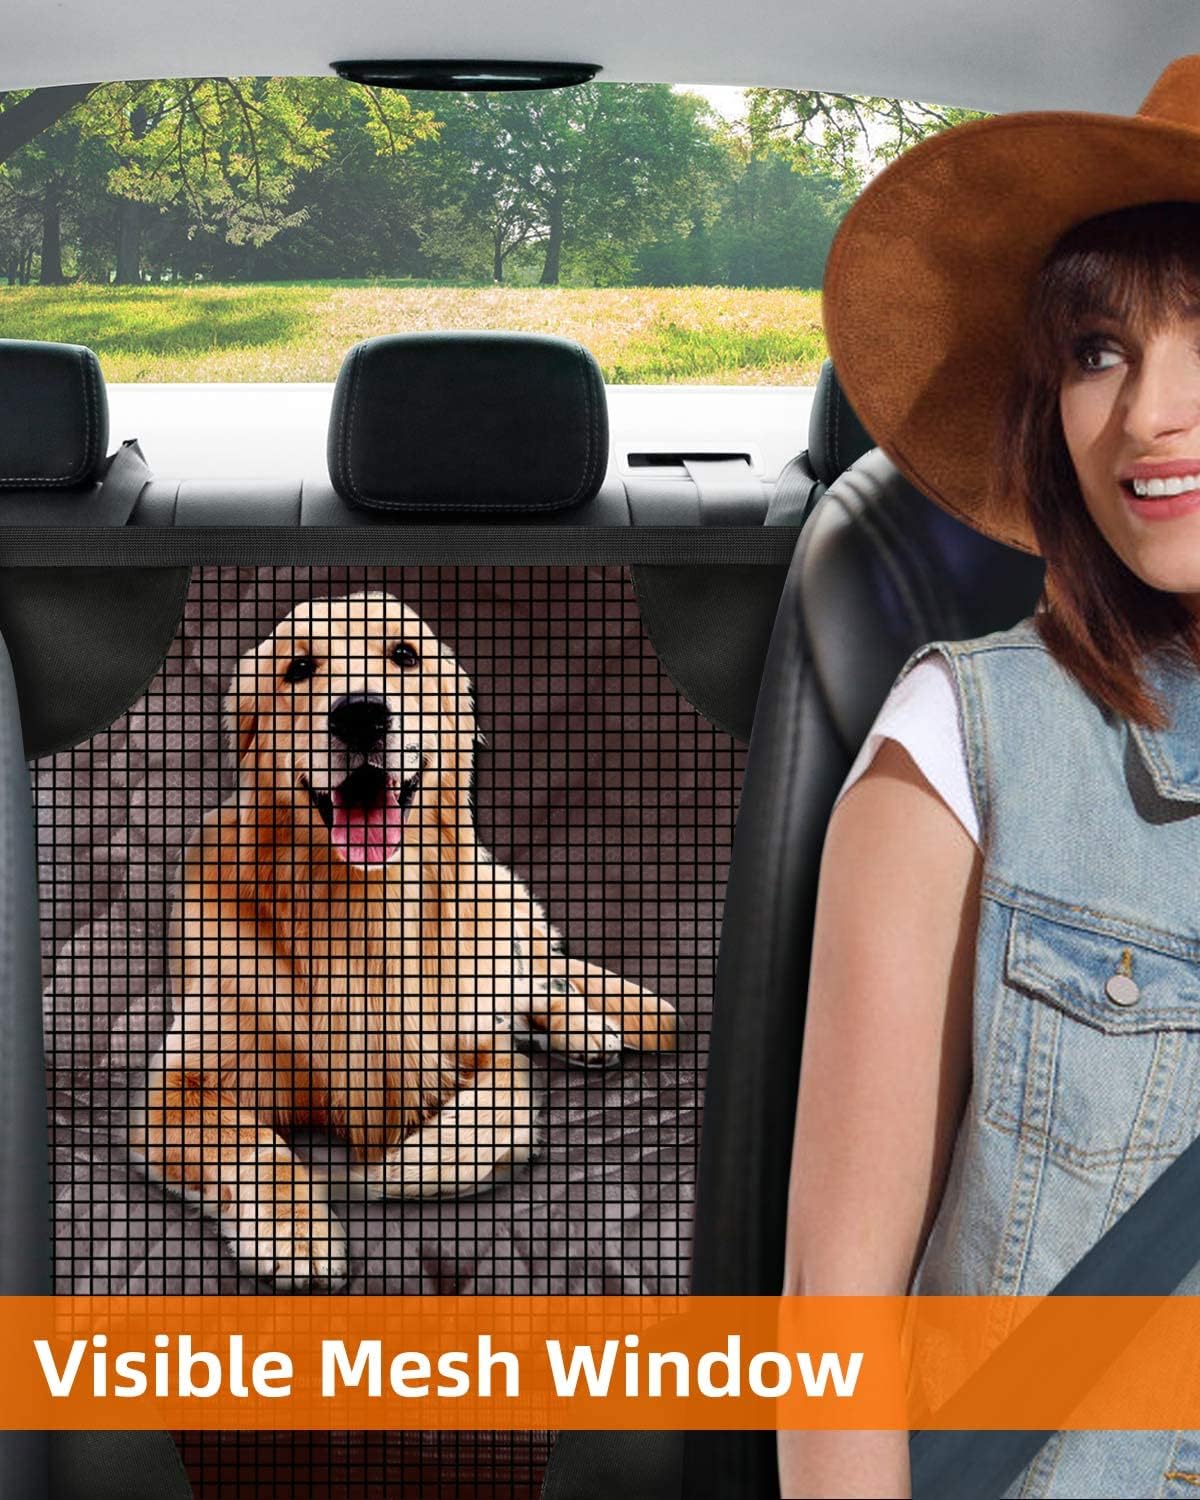 PETICON Dog Car Seat Cover for Back Seat, Waterproof Dog Seat Cover for Cars with Mesh Window, Scratchproof Back Seat Cover for Dogs, Nonslip Dog Hammock for Cars, Trucks, SUVs, Jeeps, Brown